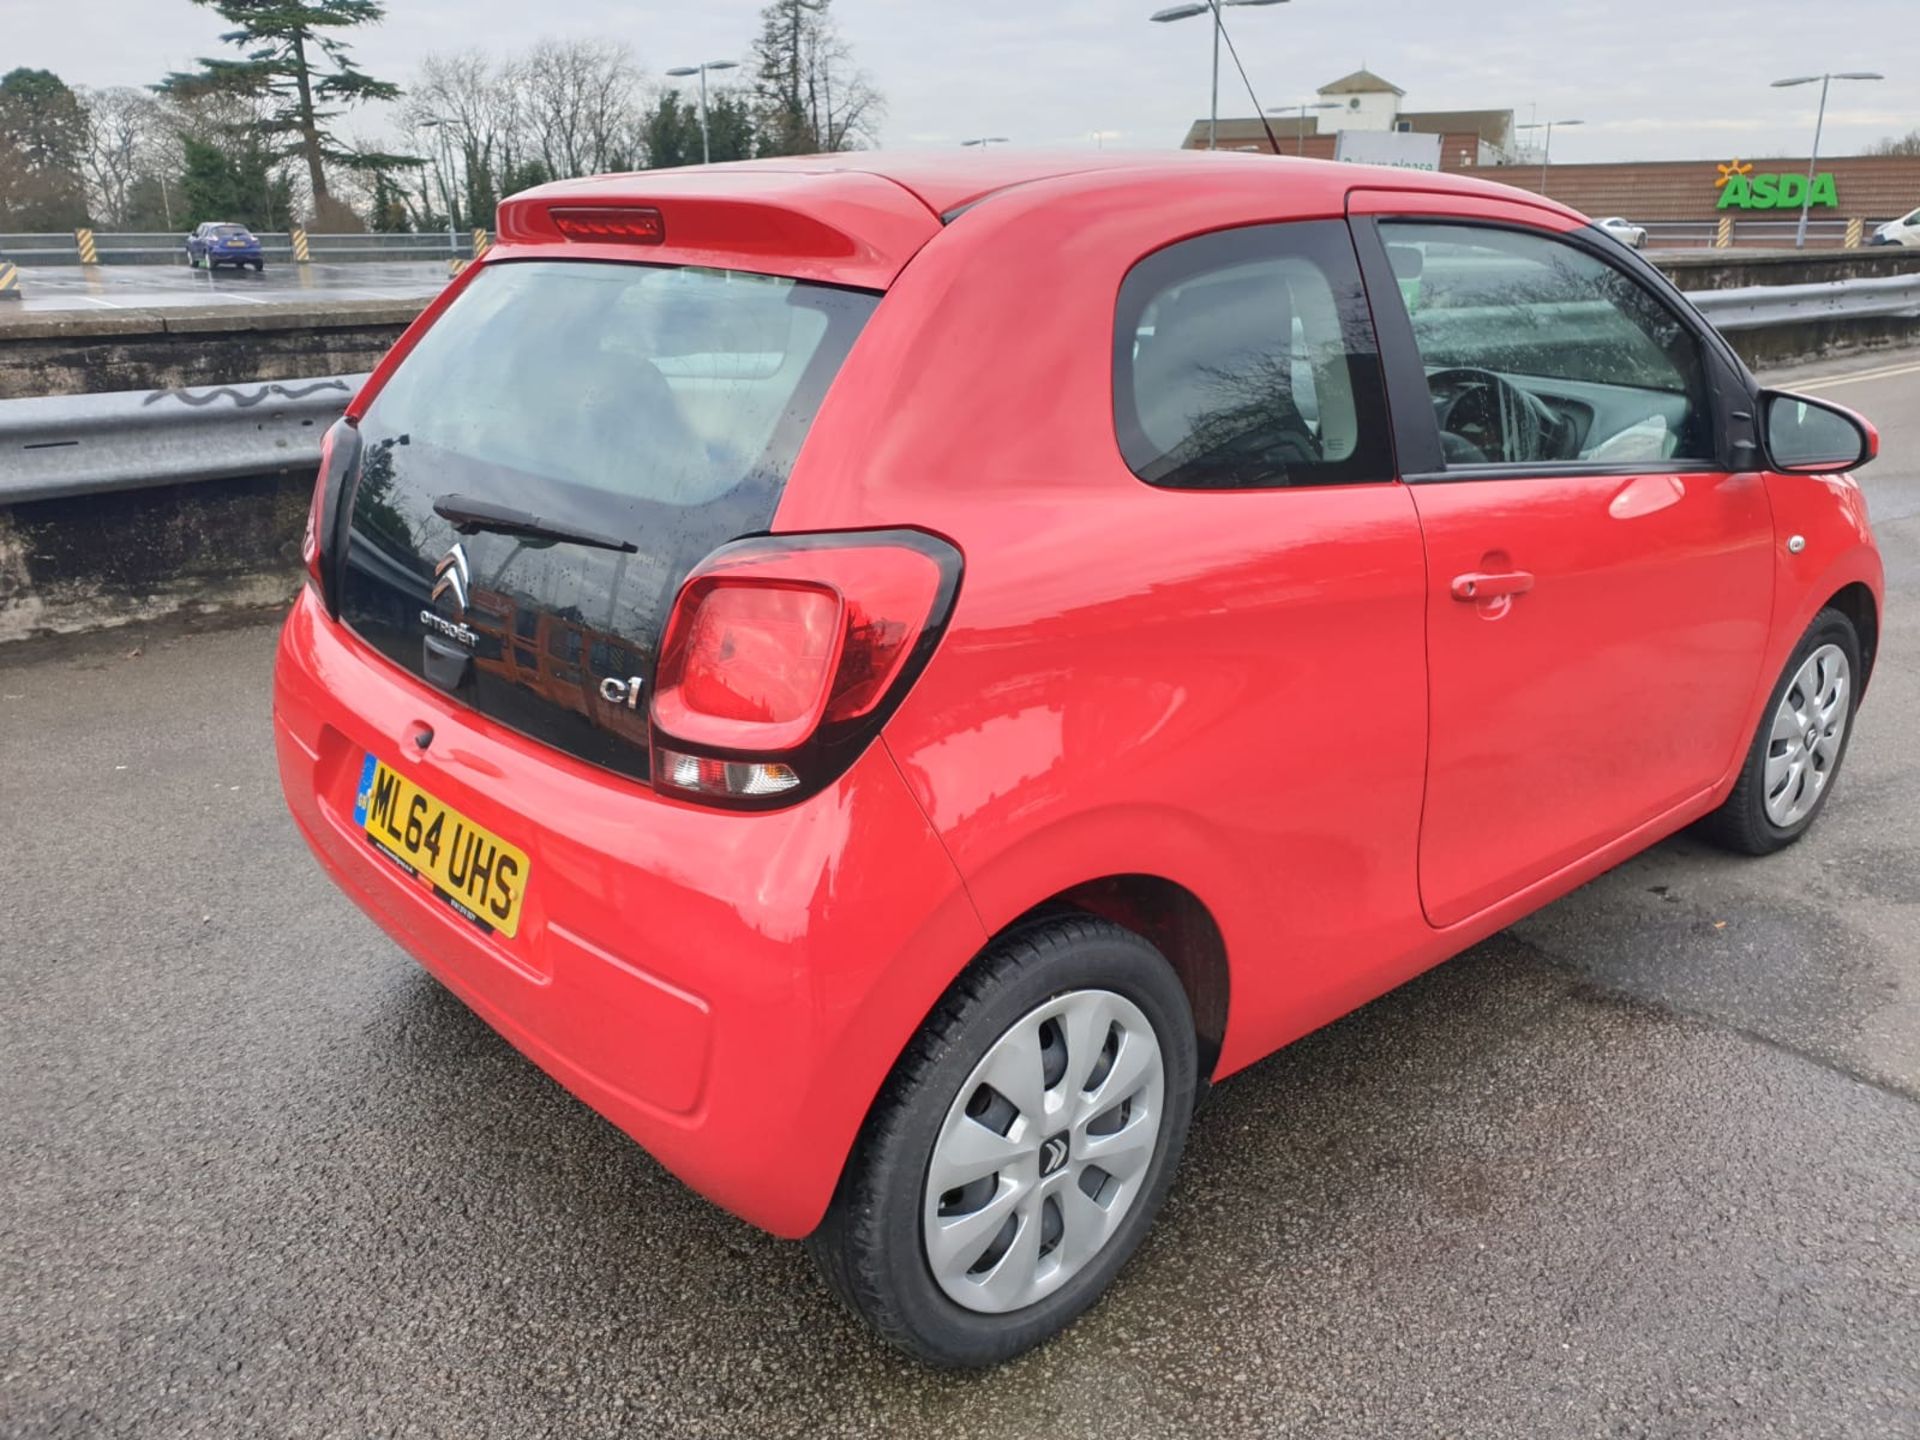 CITROEN C1 FEEL ML64 UHS COLLECTION LEICESTER - Image 6 of 10